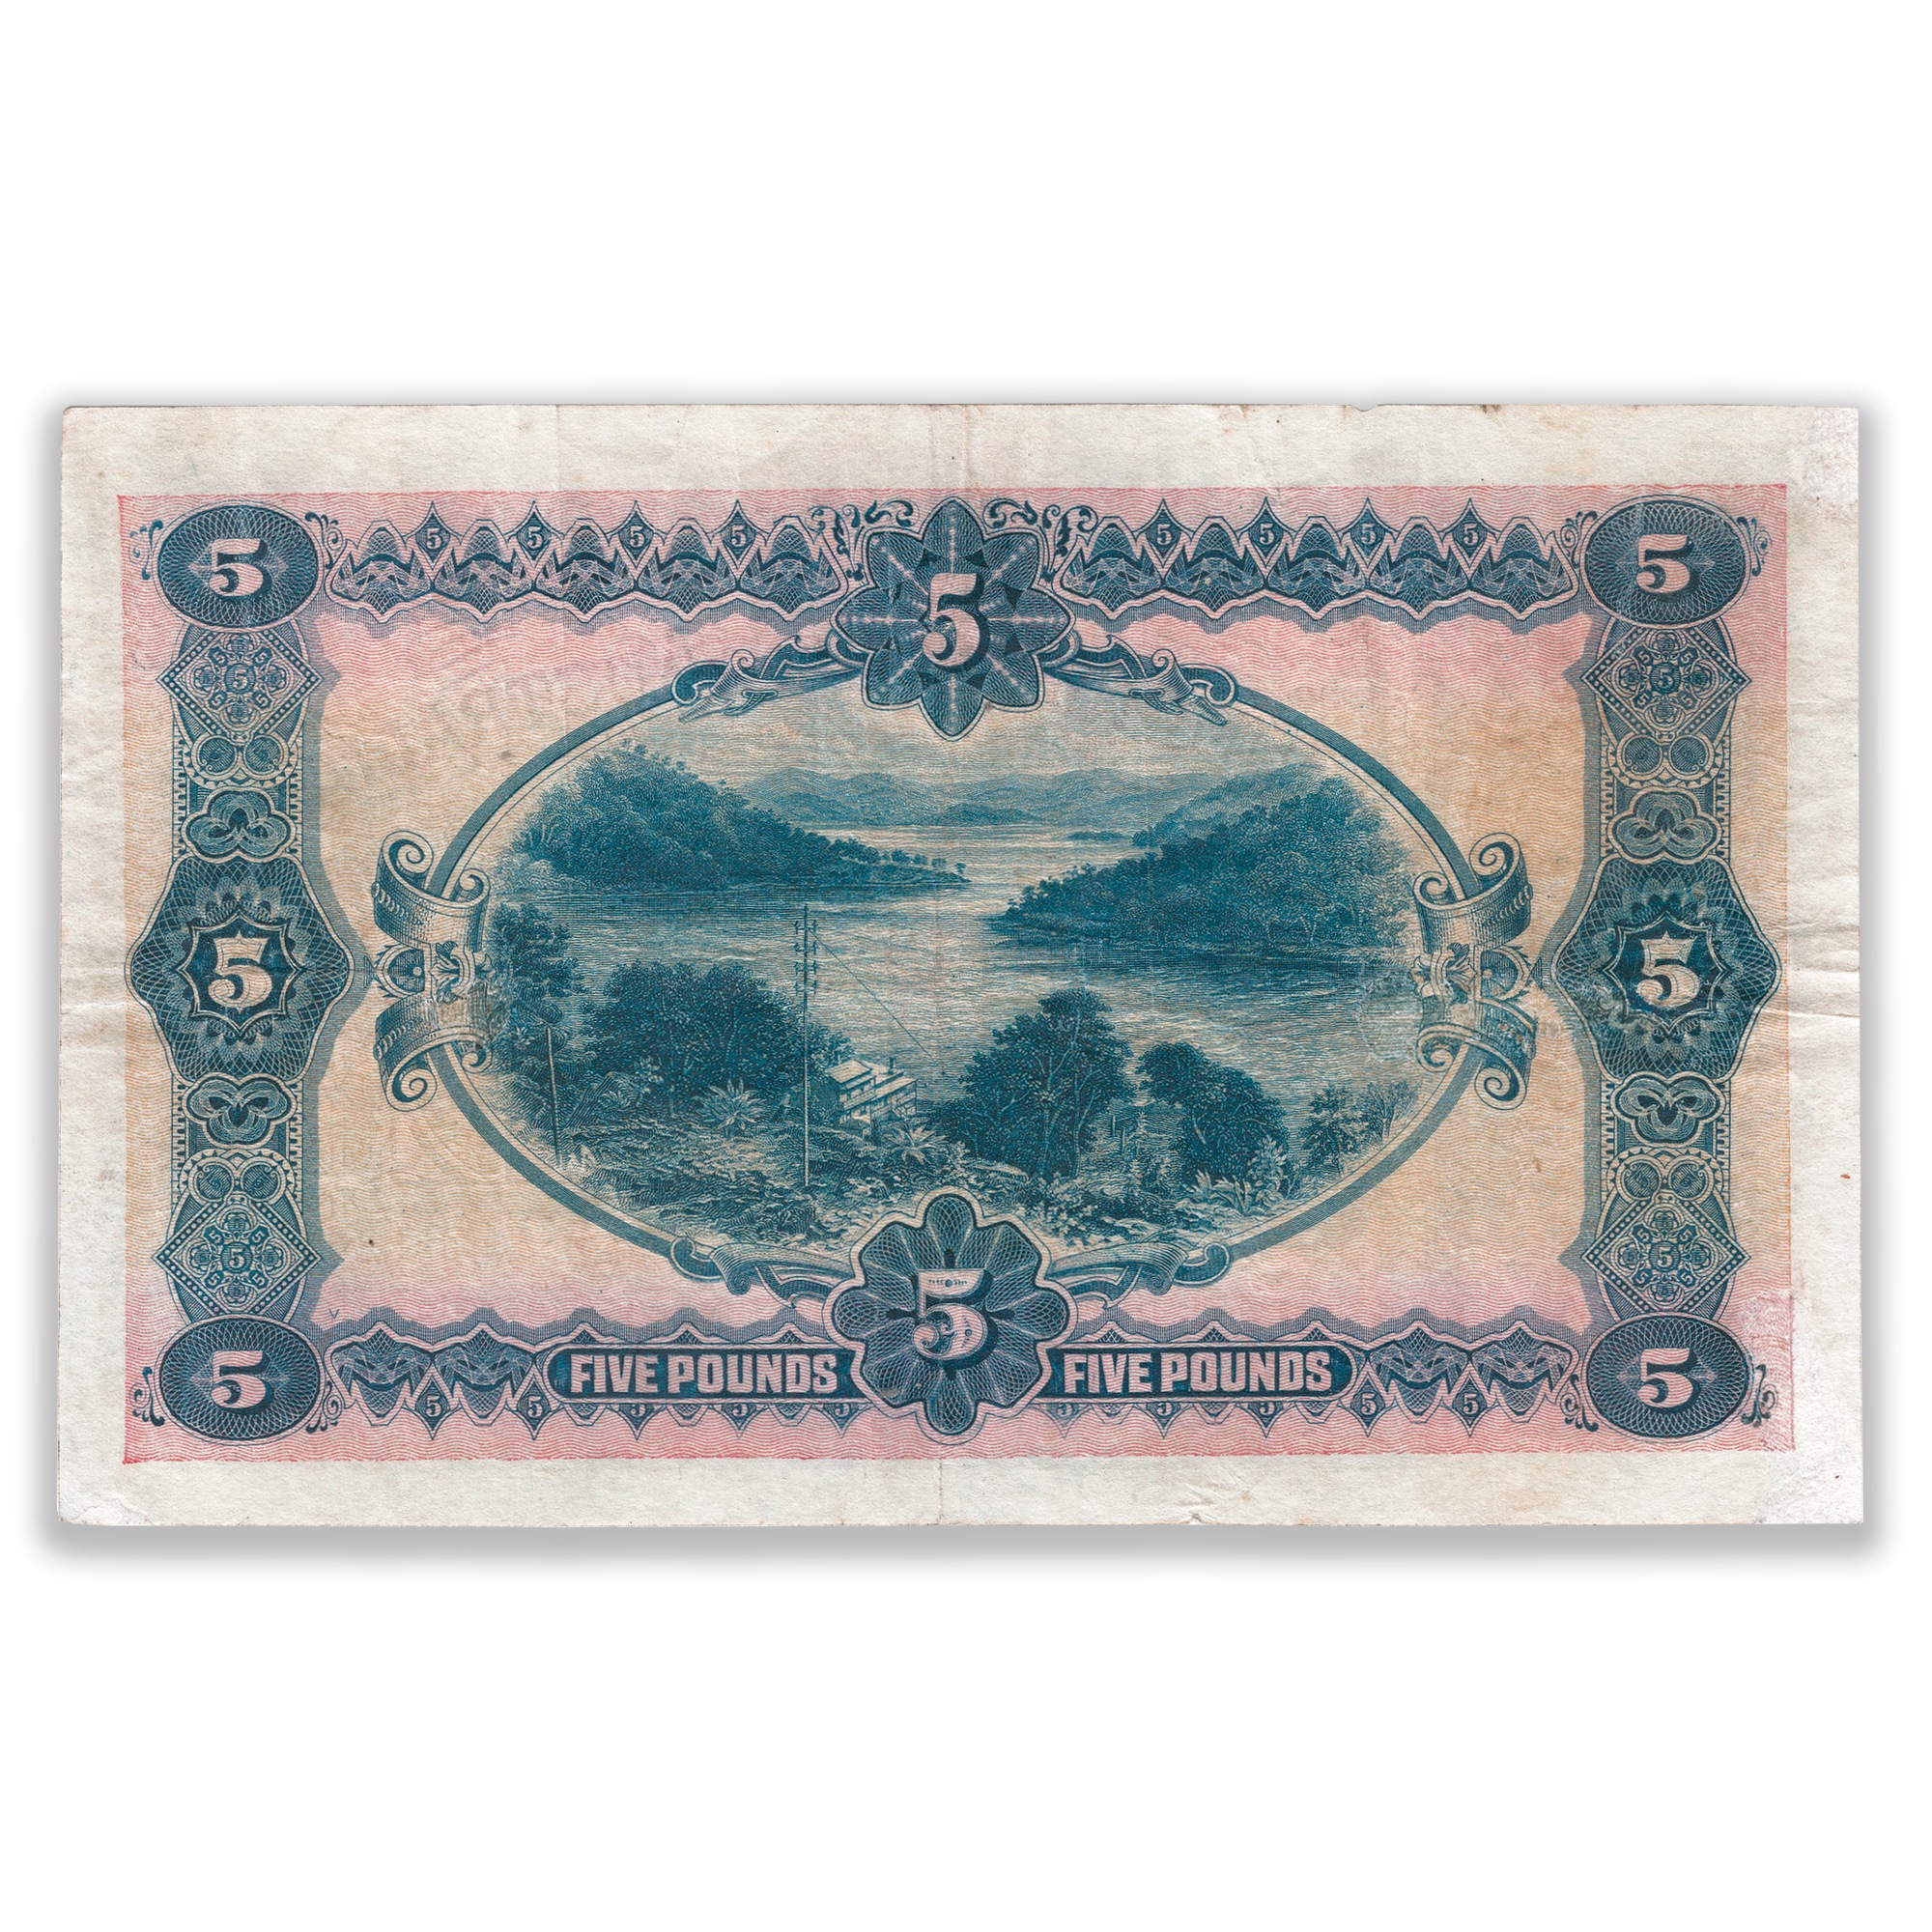 R35 1913 Five Pound Banknote Good Very Fine / About Extra Fi